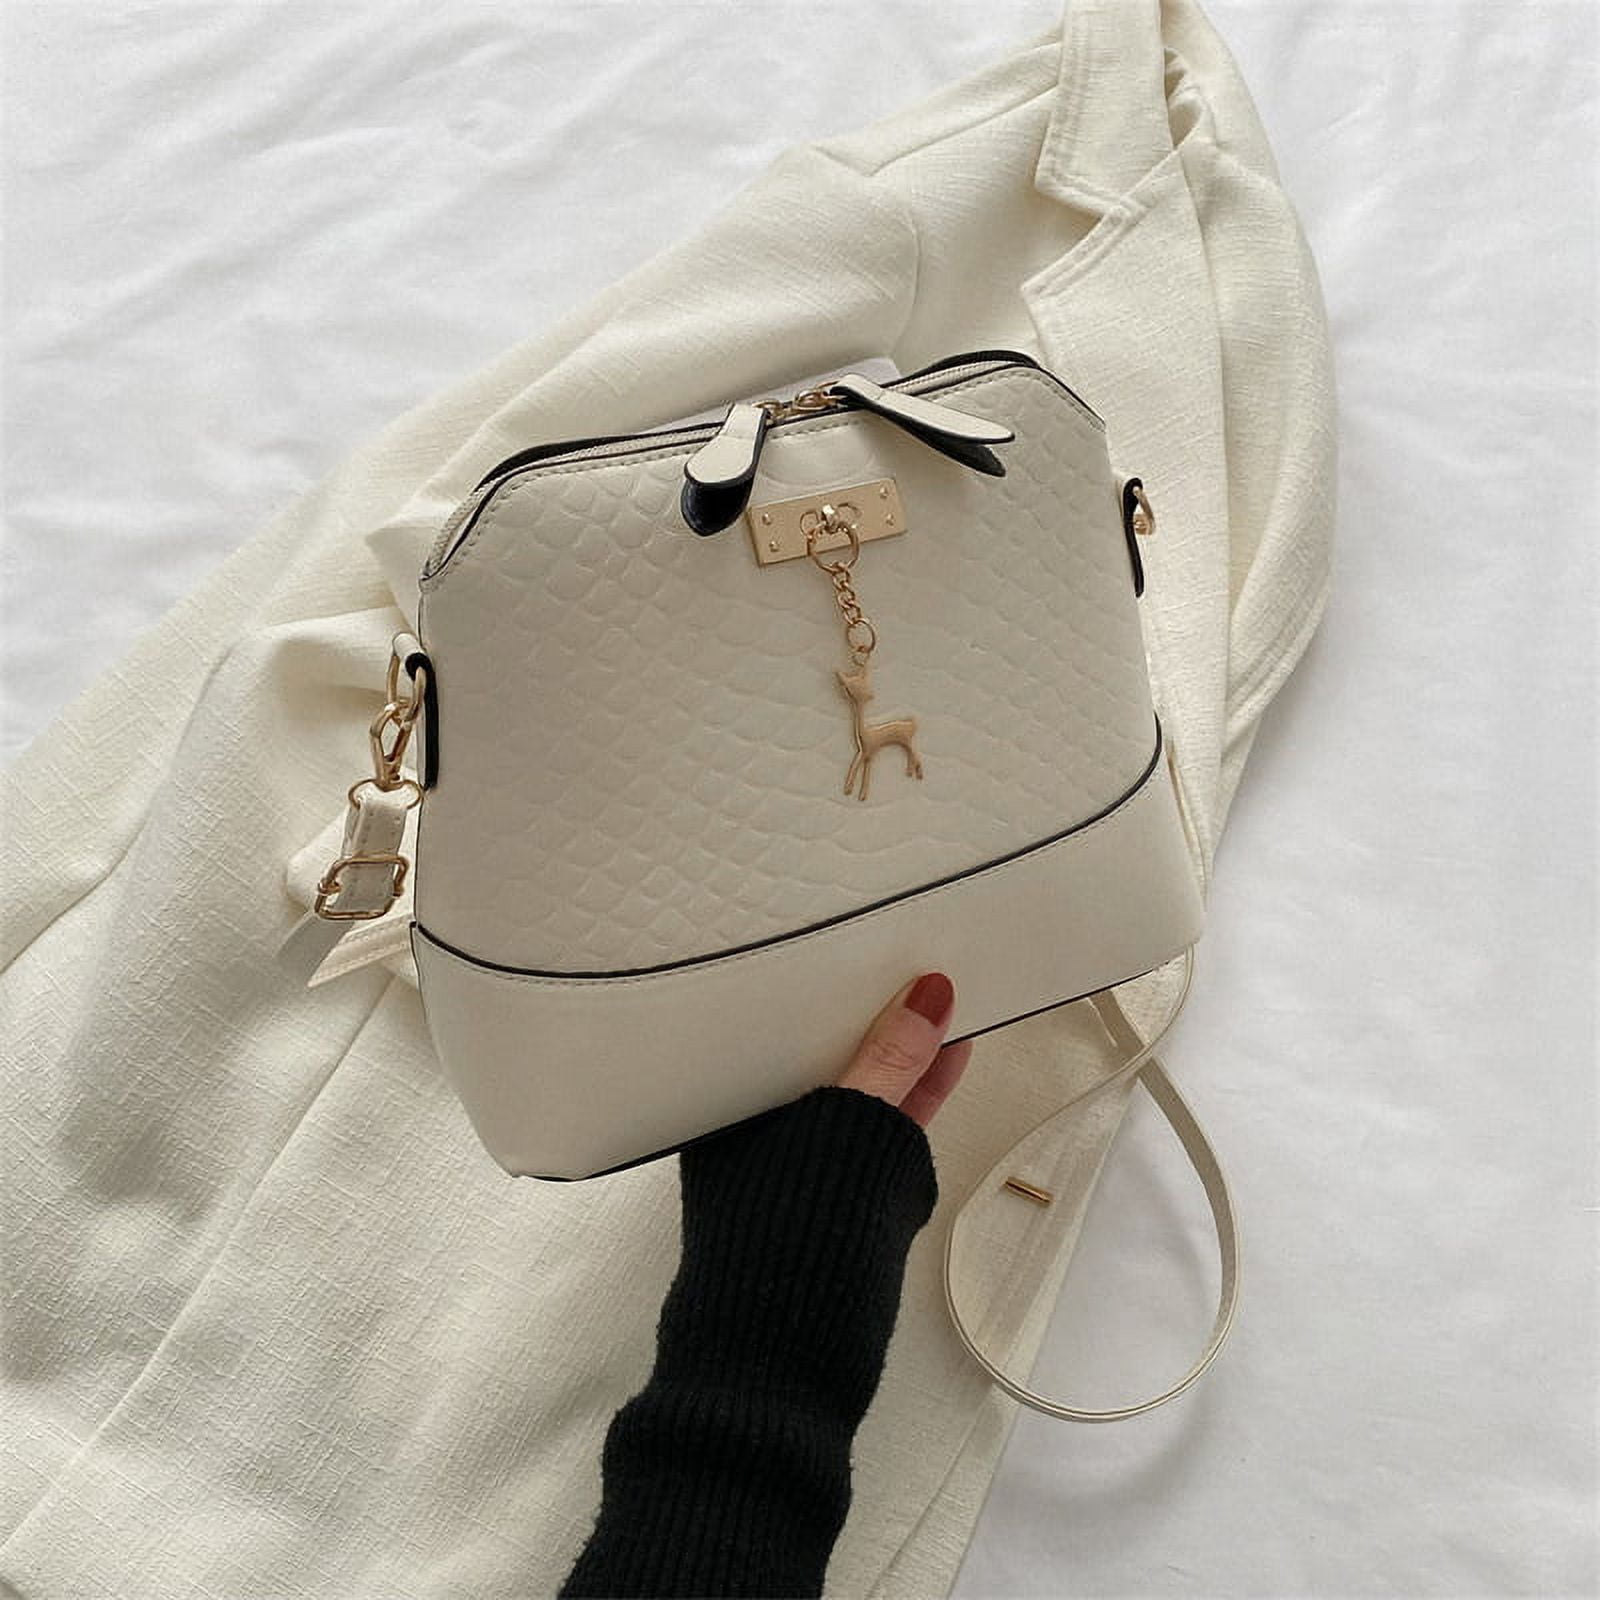 Kei By Karina From All Seller on Instagram: . NEW ARRIVAL Ready NEW BNIB L BEAUBOURG  HOBO Mini Monogram Braided size 25 x 15 x 20 cm 2019 Complete set with db